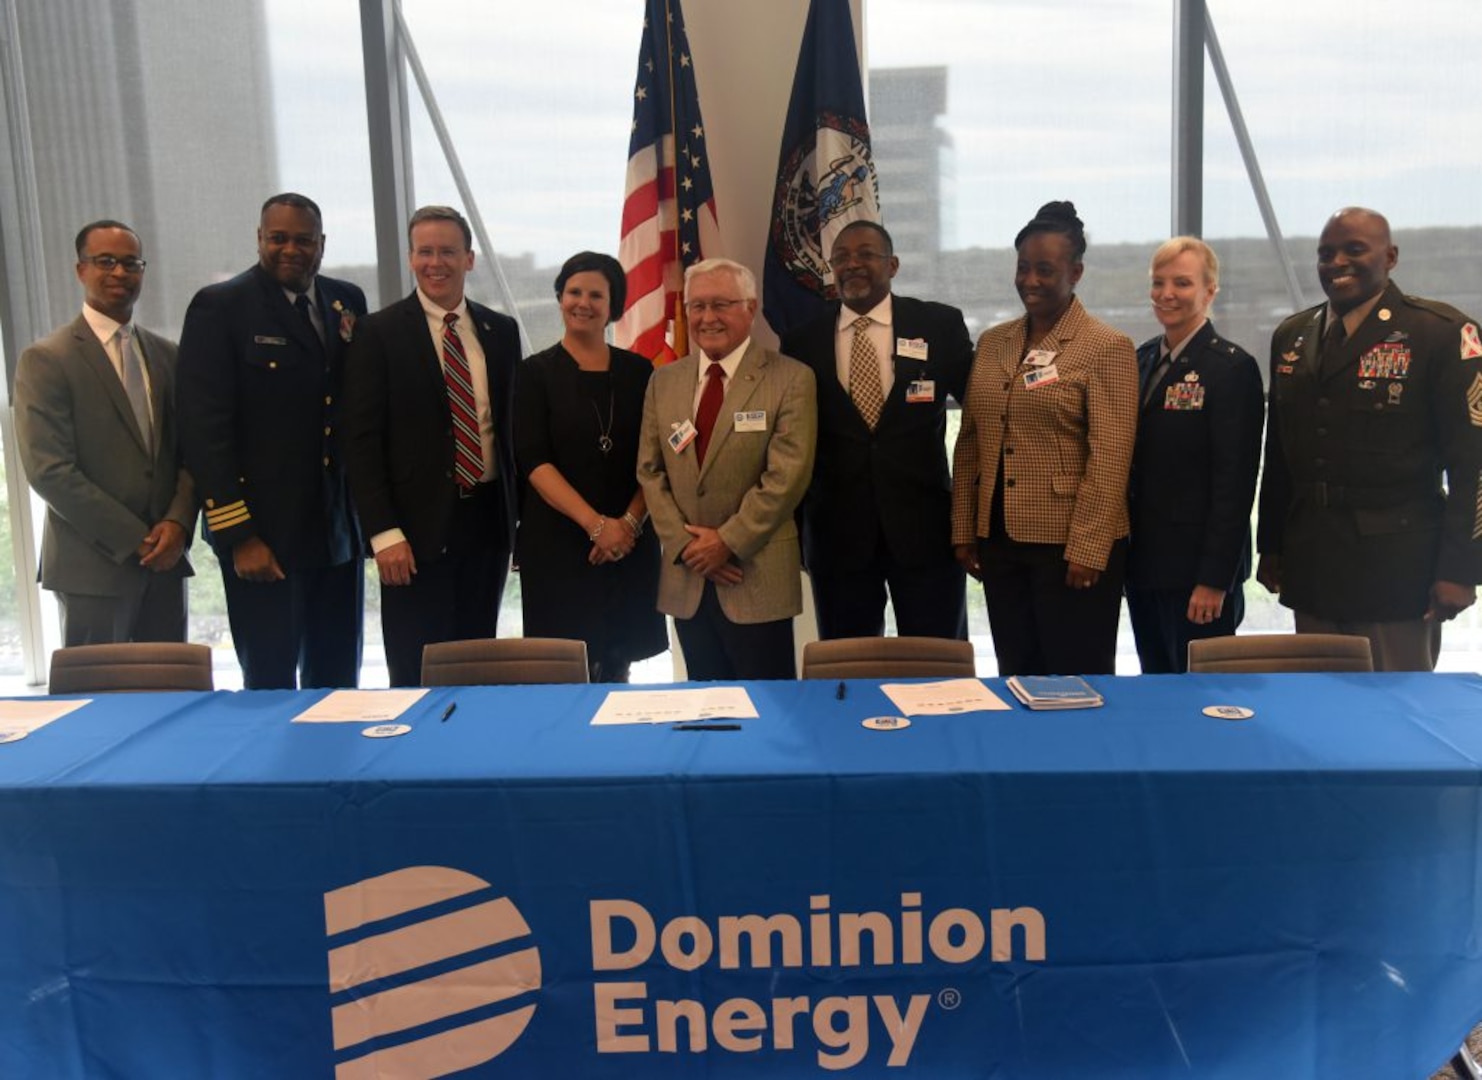 Dominion Energy pledges support of Guard employees during ceremony